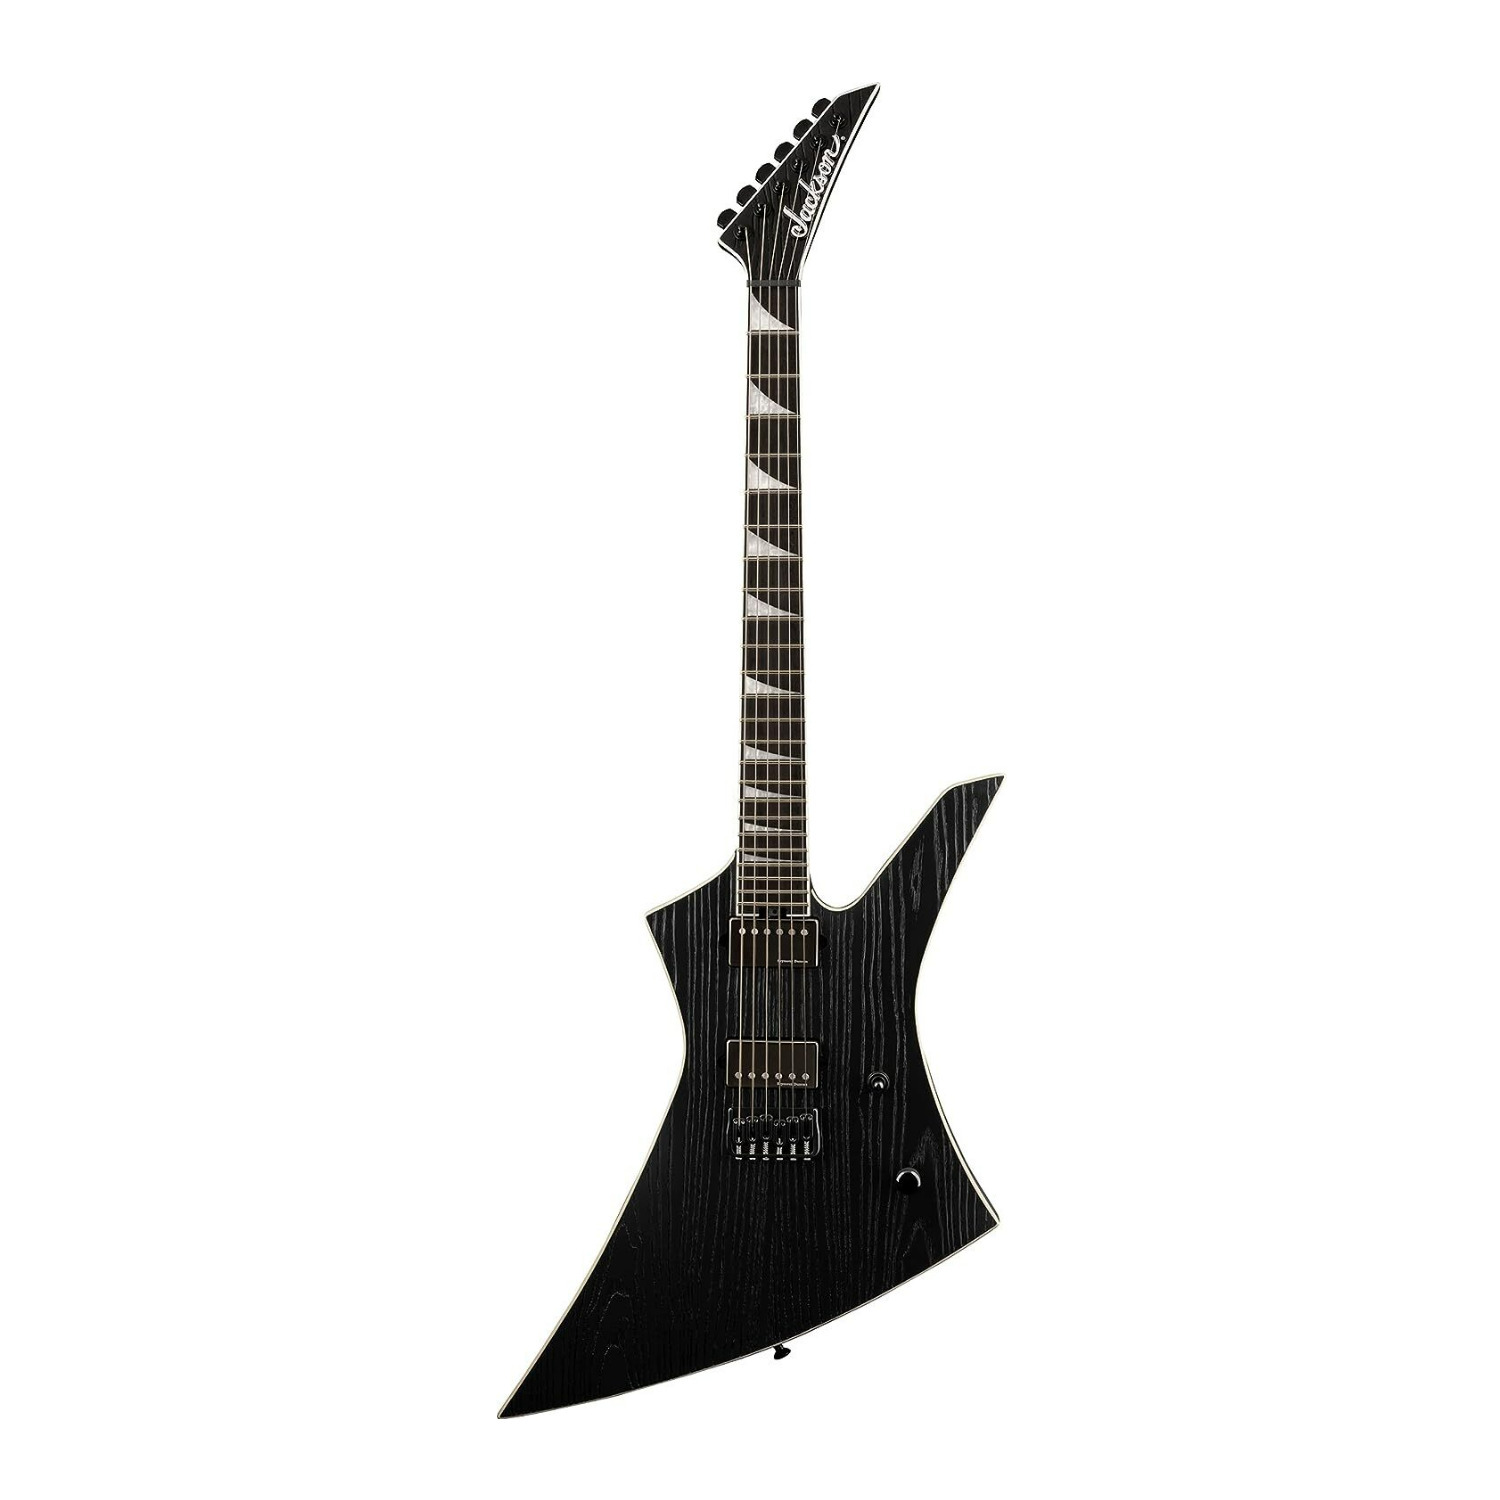 Jackson Guitars Jackson Limited Edition Signature Right-Handed 6-String Electric Guitar with Maple Neck in Black -  2916672568